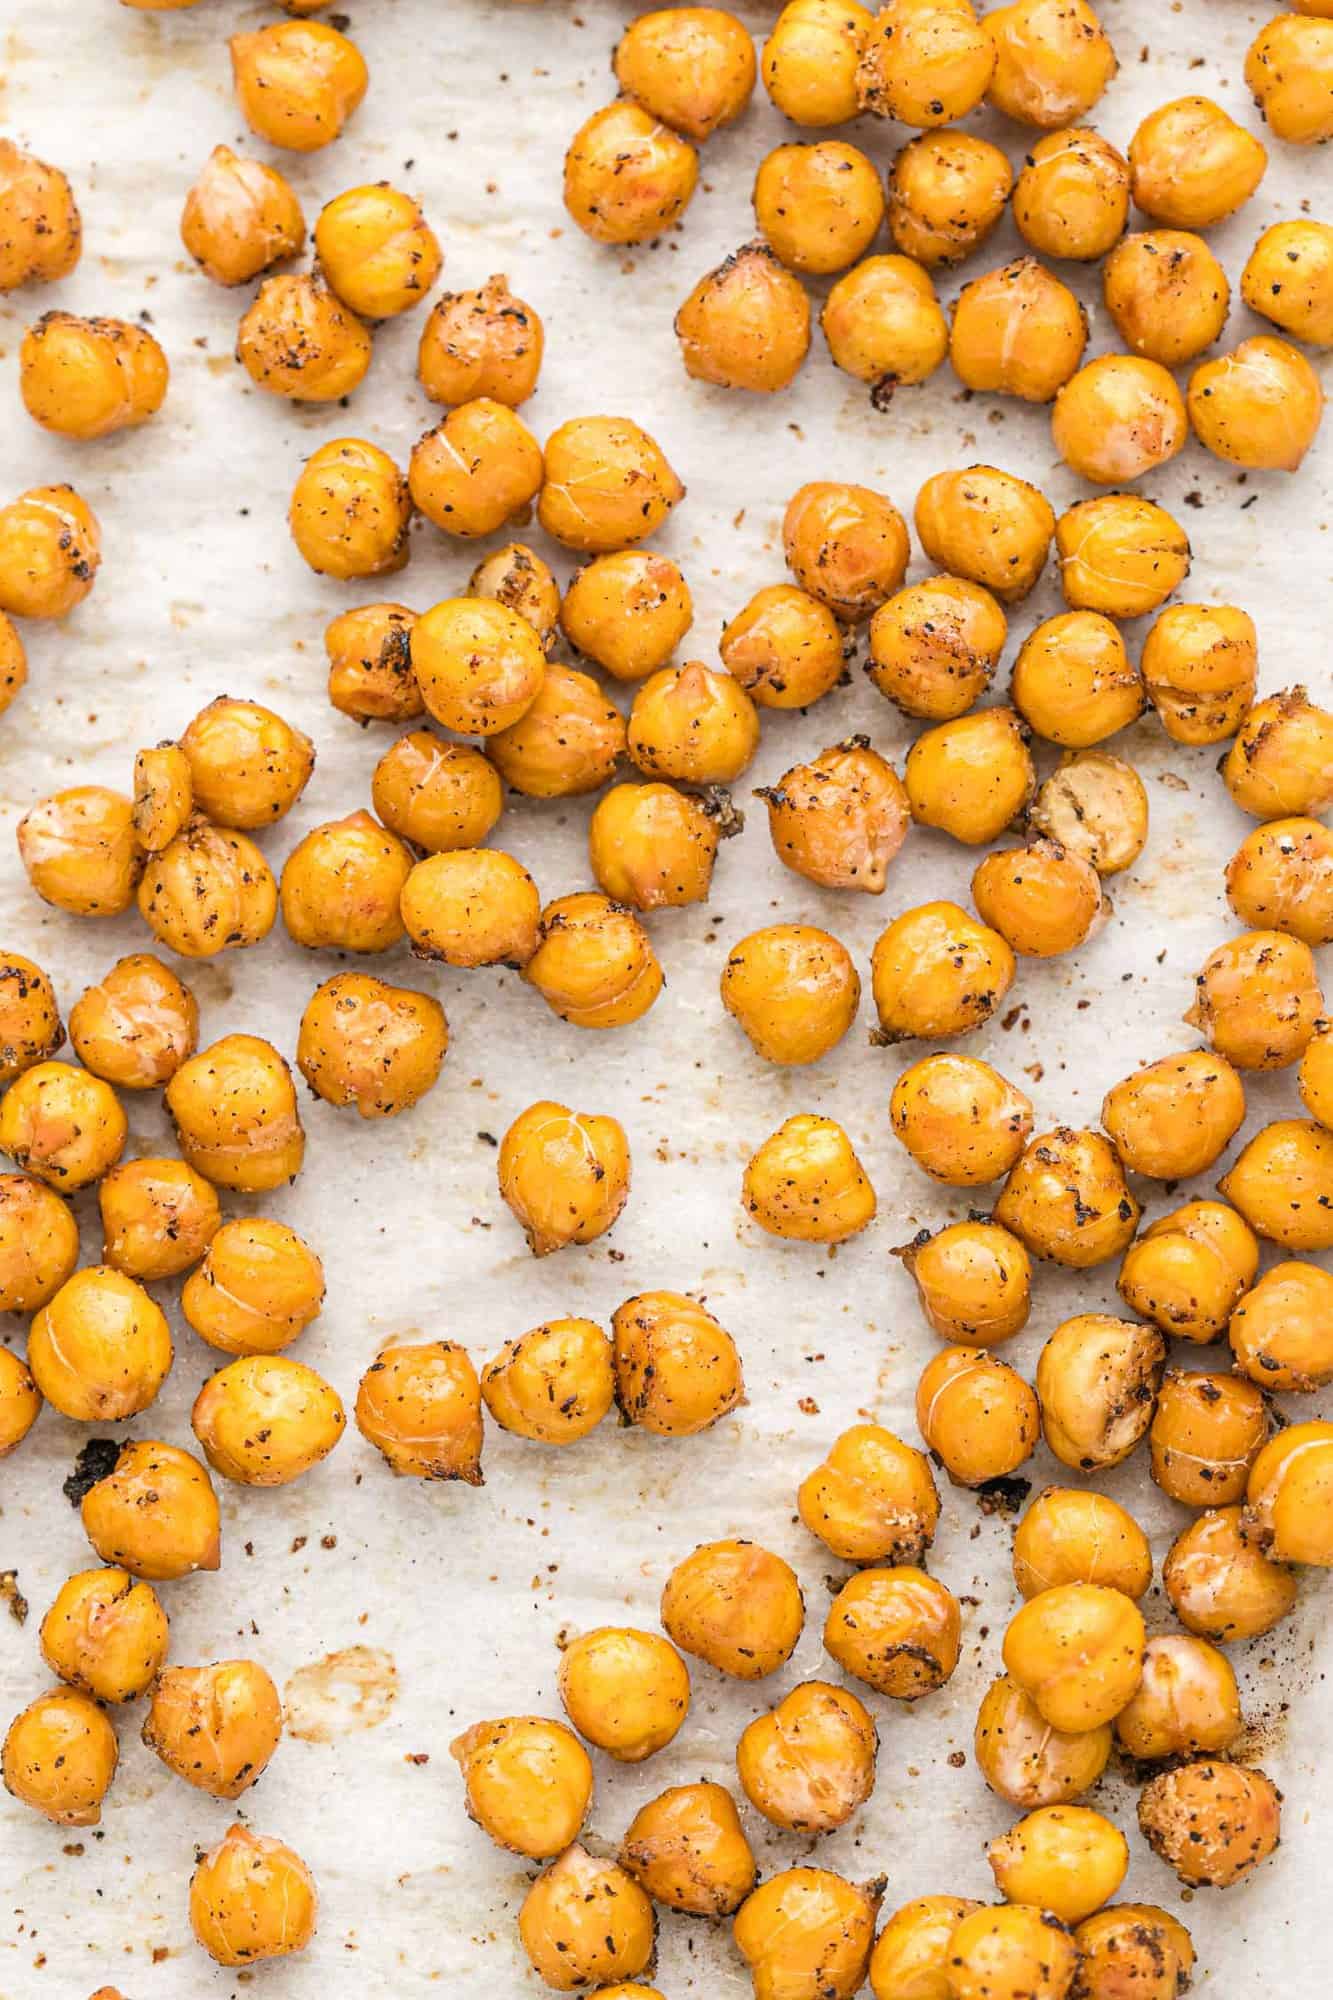 Close up of roasted chickpeas with salt and pepper n a white surface.